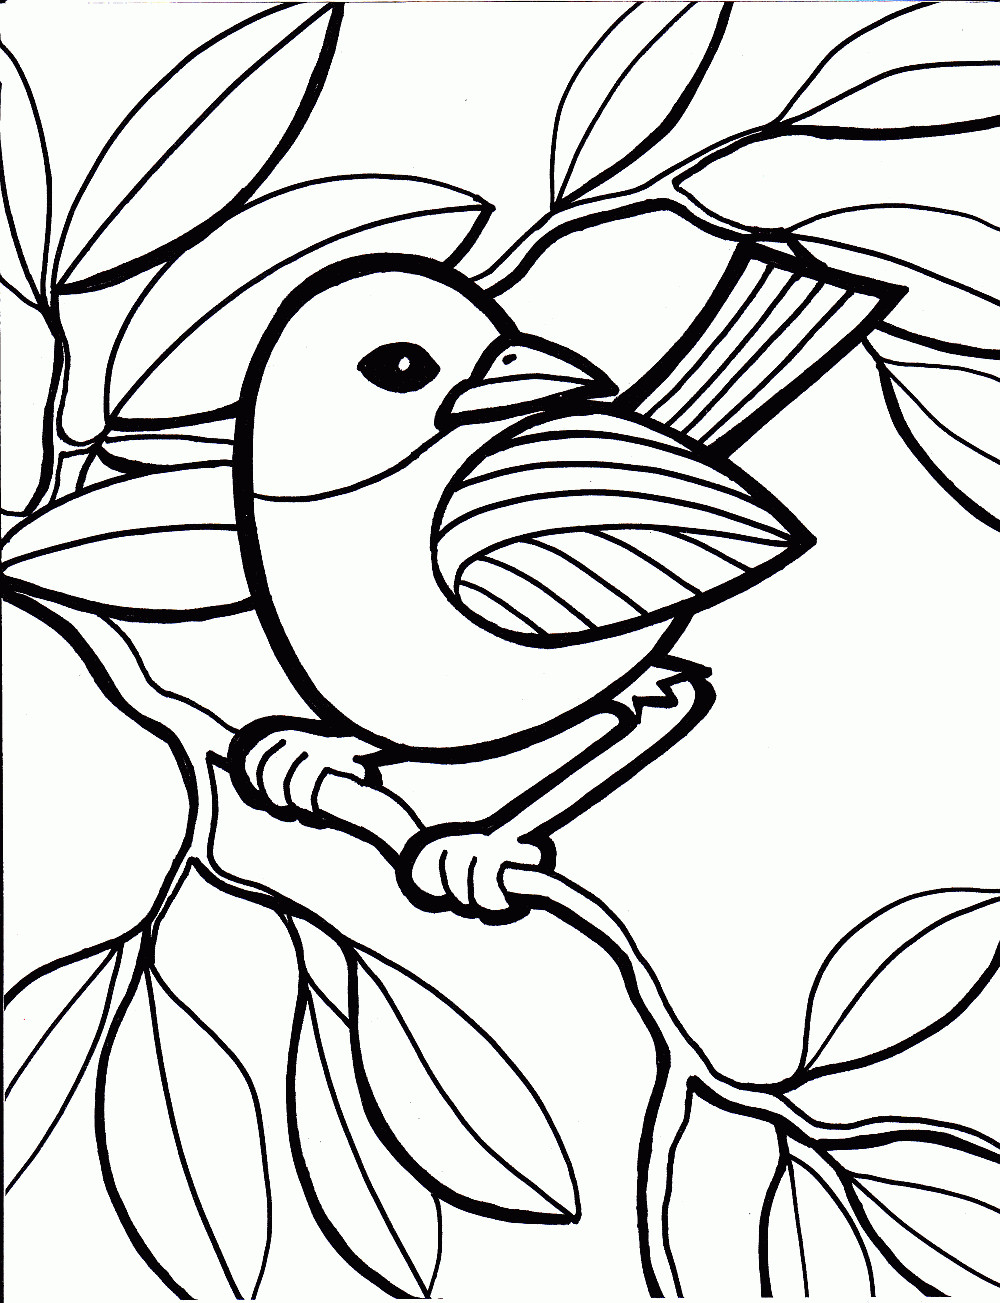 Fun Coloring Pages For Girls
 Free Coloring Pages For Kids Top Profile